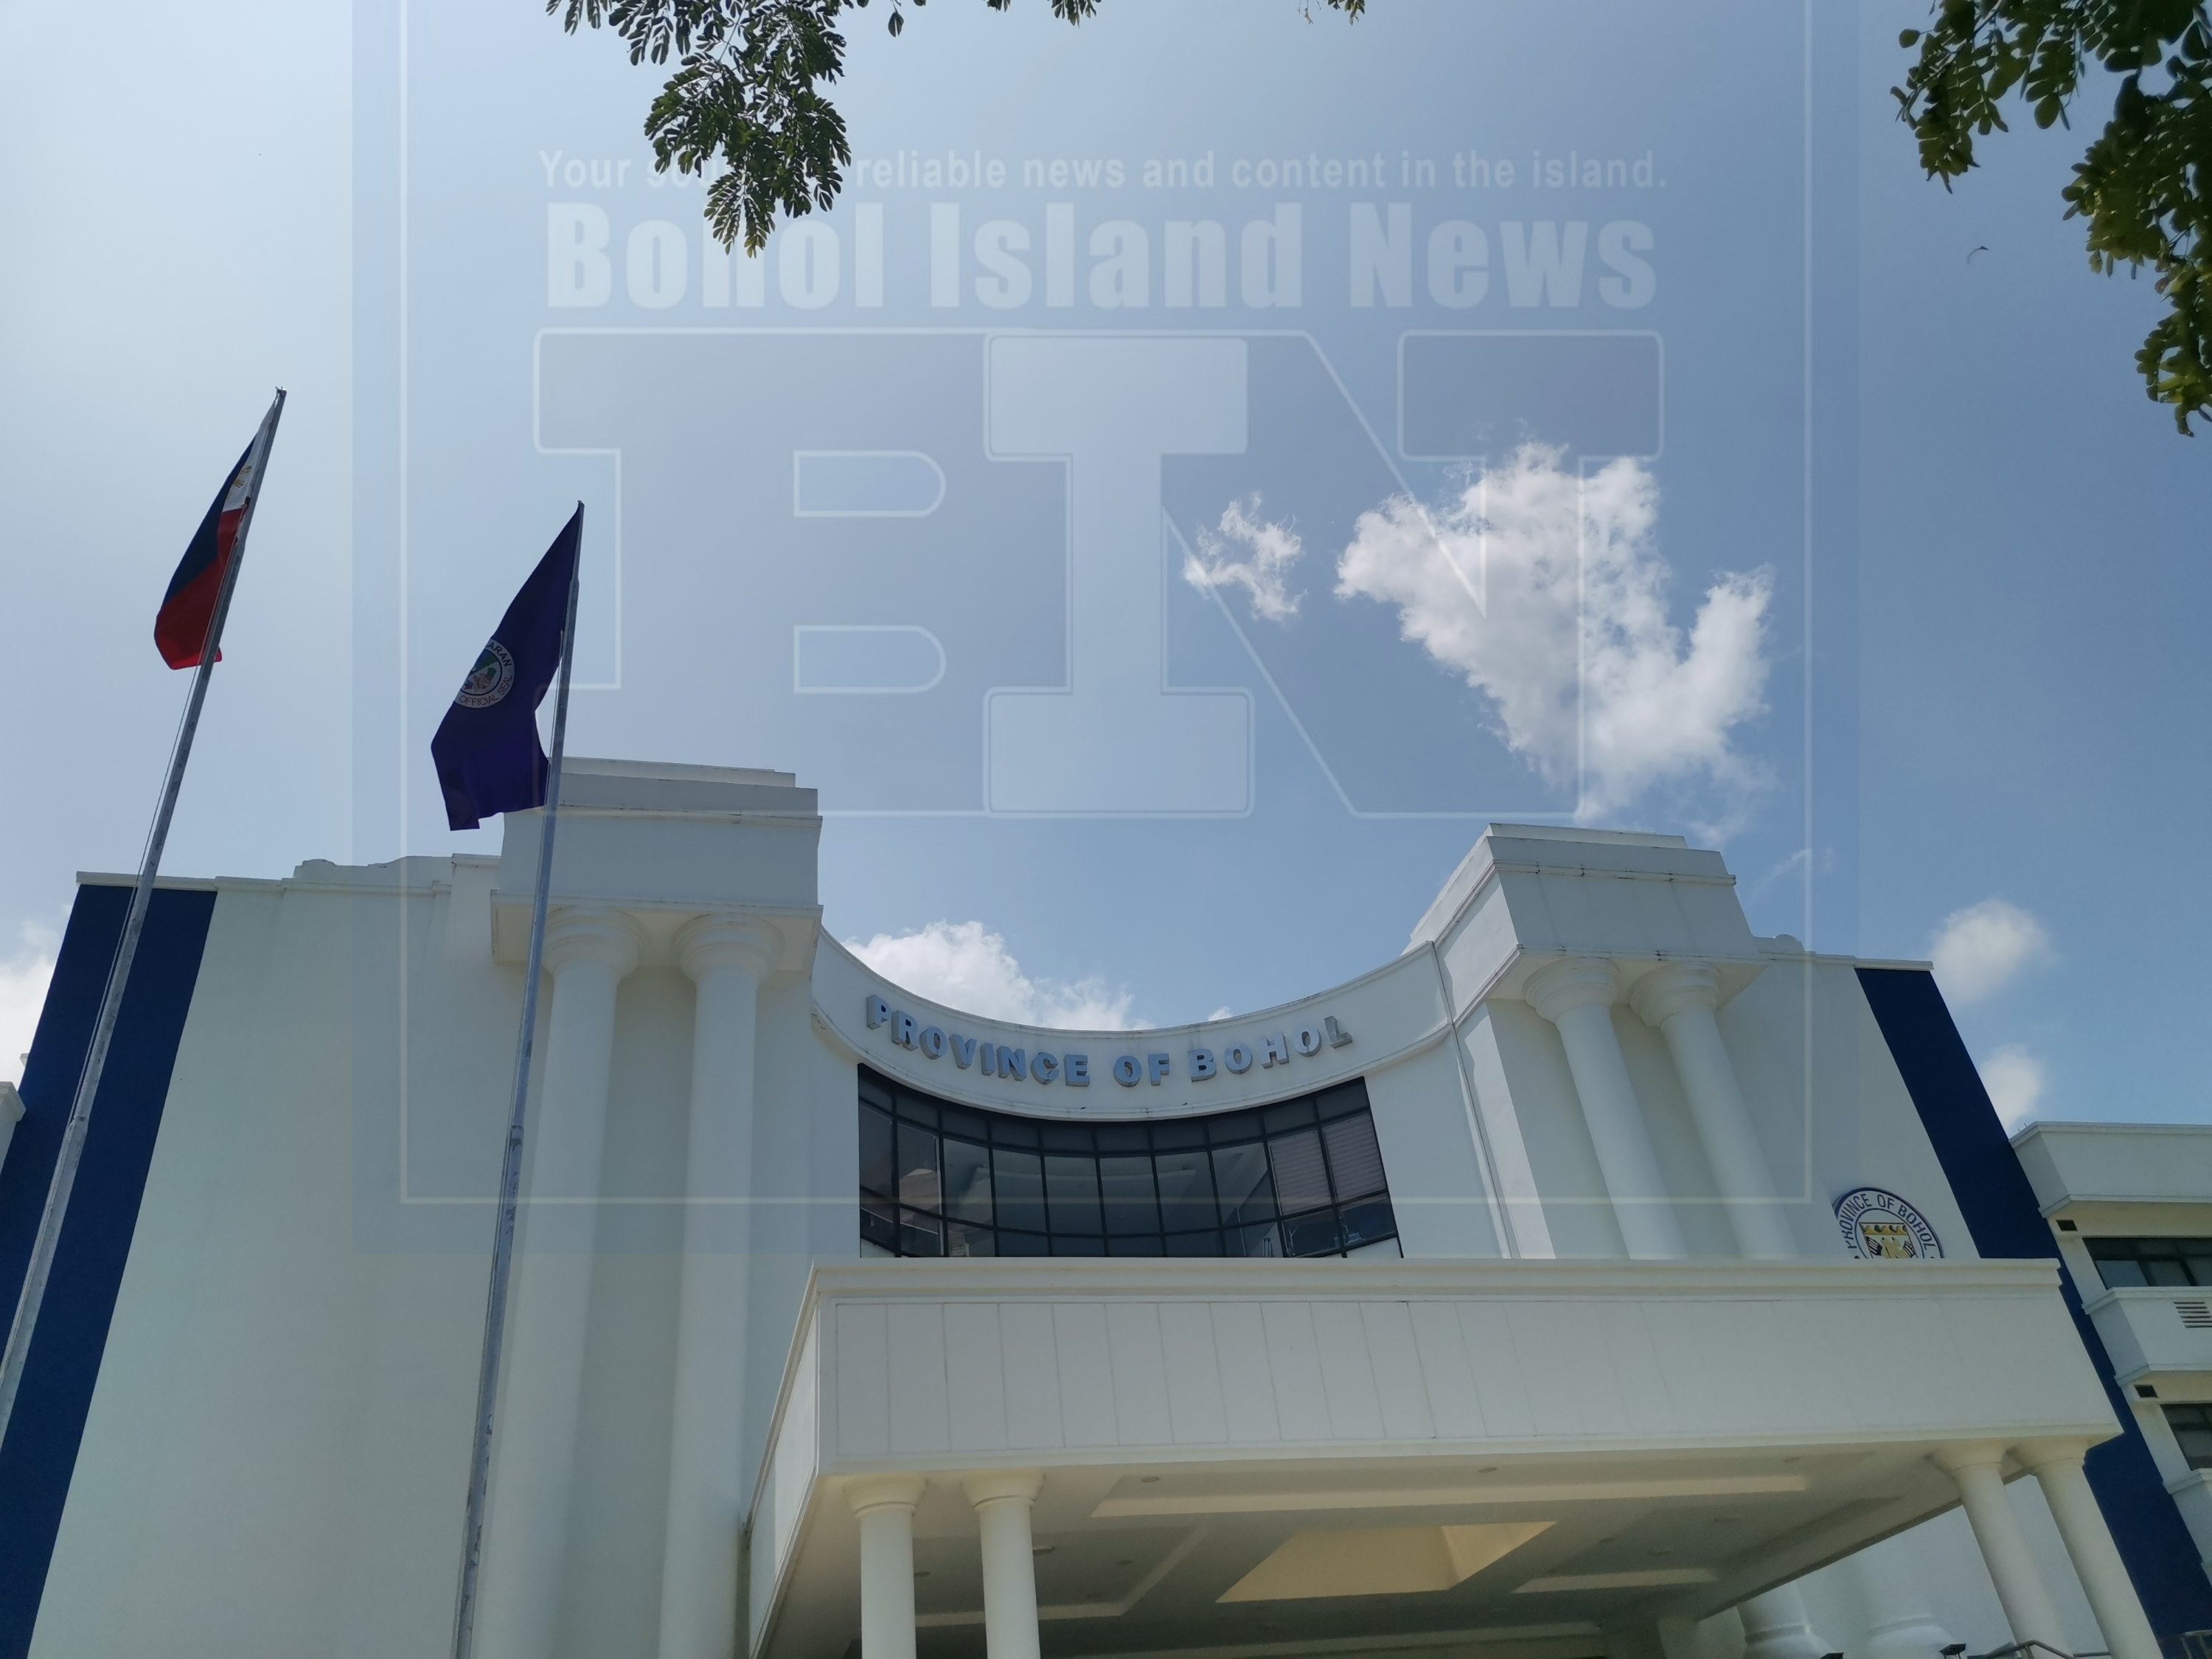 128 new Covid cases recorded in Bohol